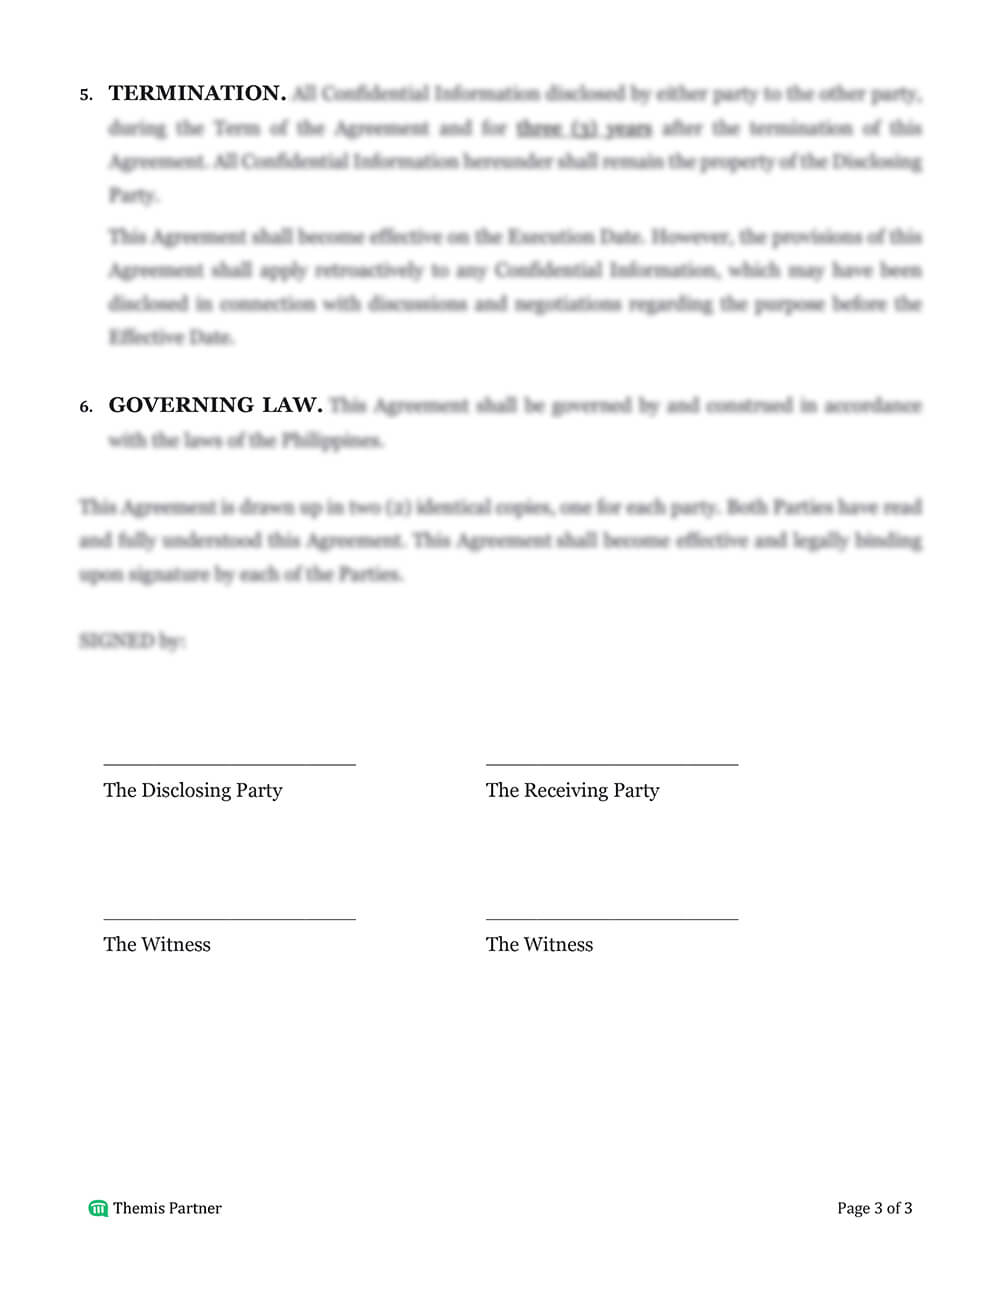 Non-disclosure agreement template 3